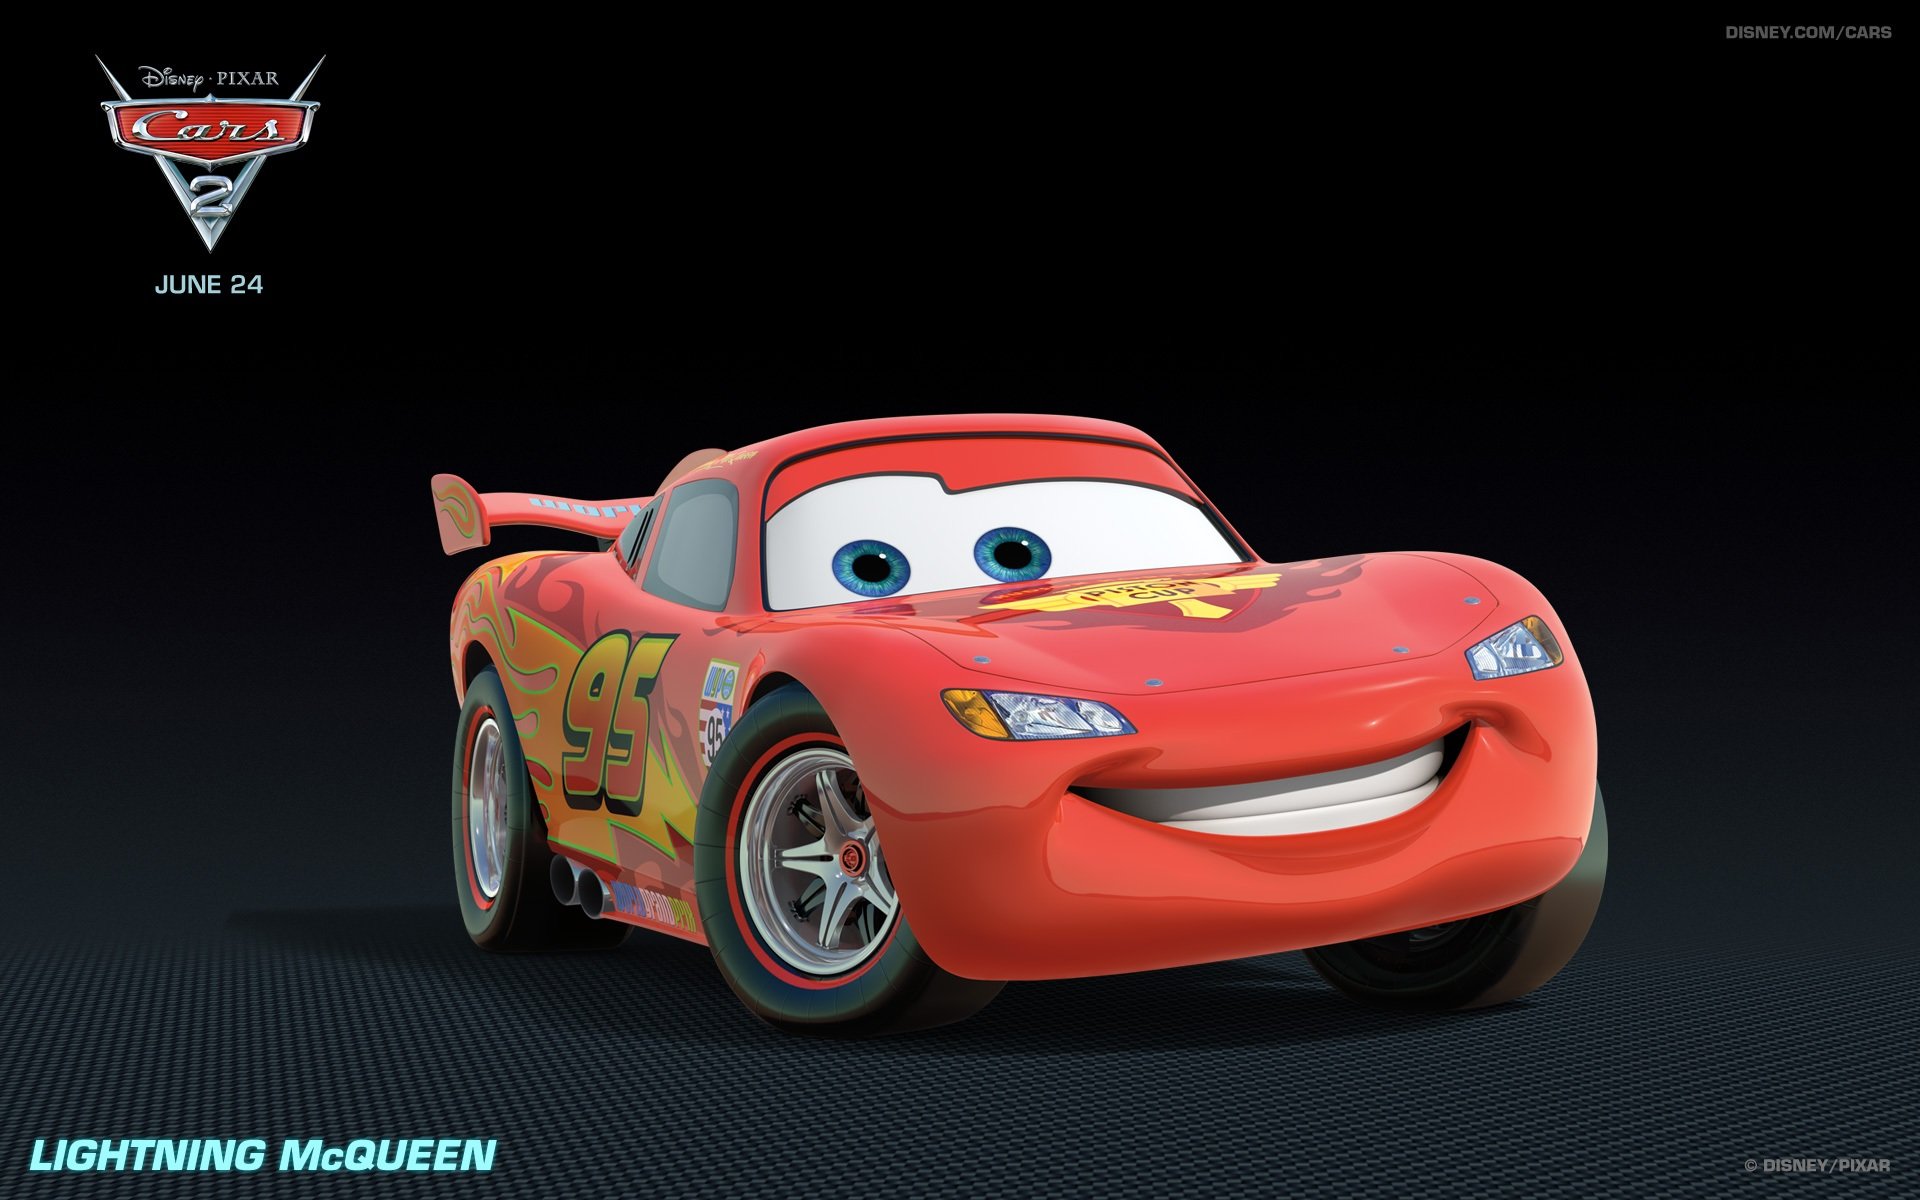 Best Cars 2 wallpaper ID:319573 for High Resolution hd 1920x1200 computer